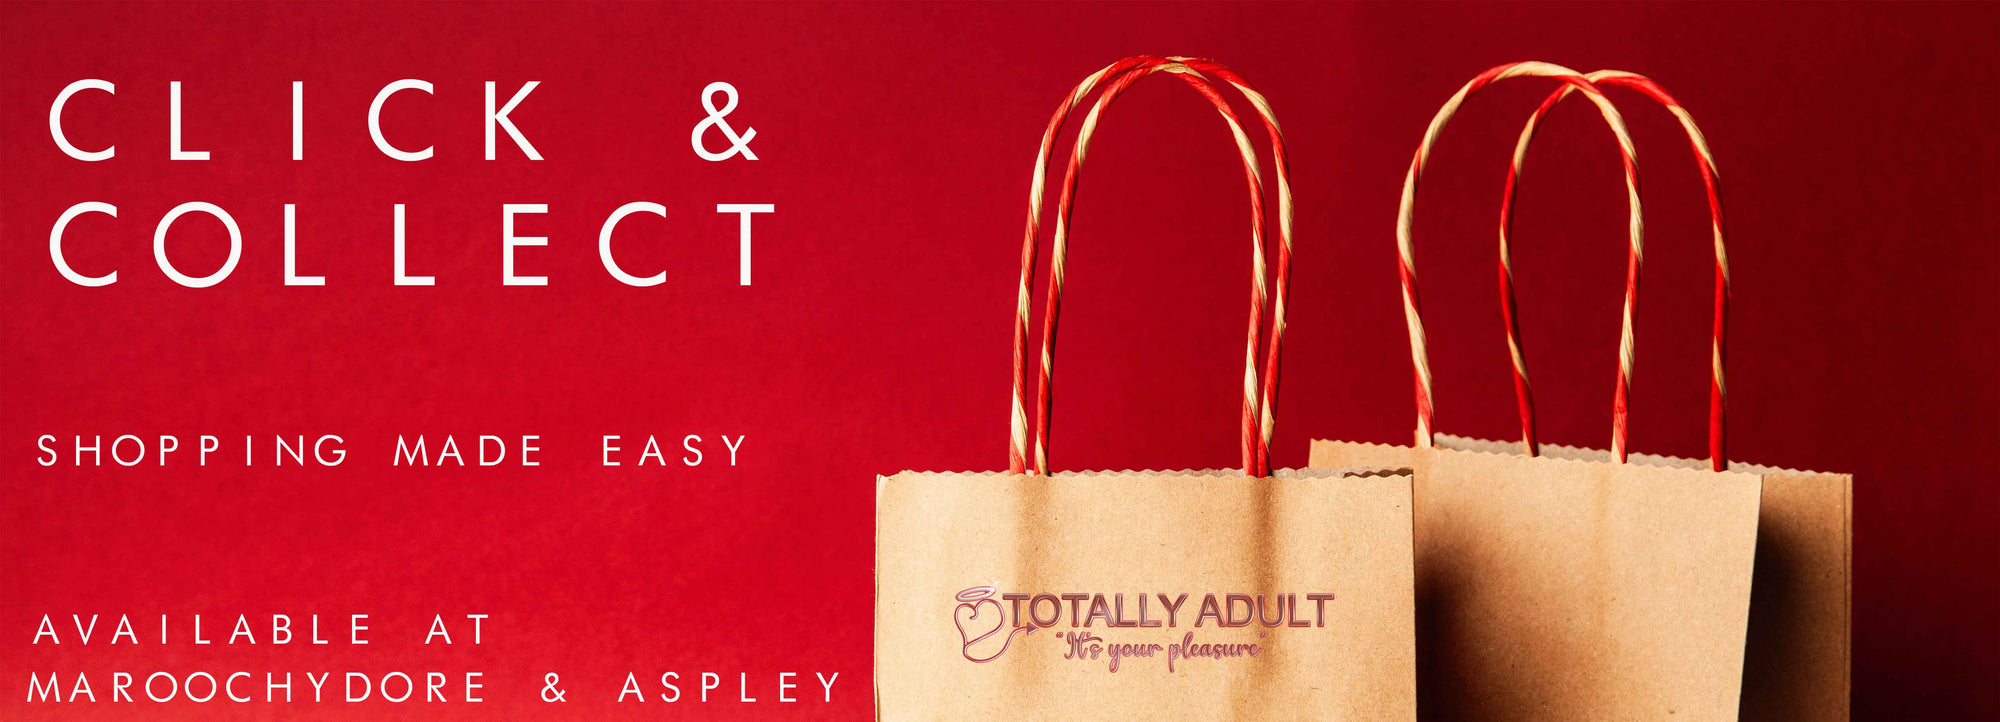 Click & Collect - Totally Adult